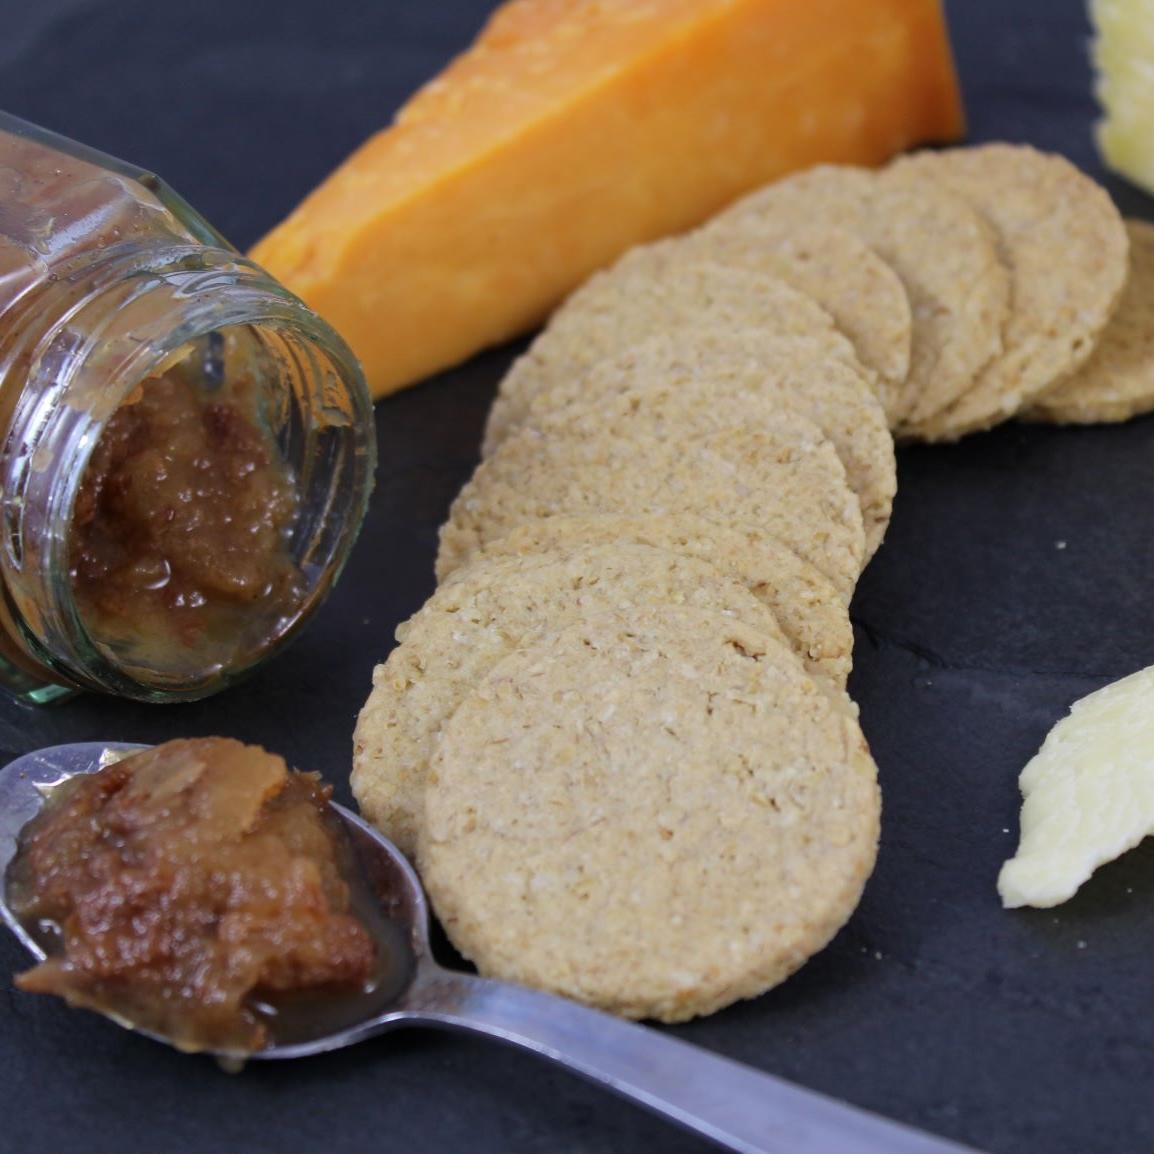 Oatcakes with chutney and cheese